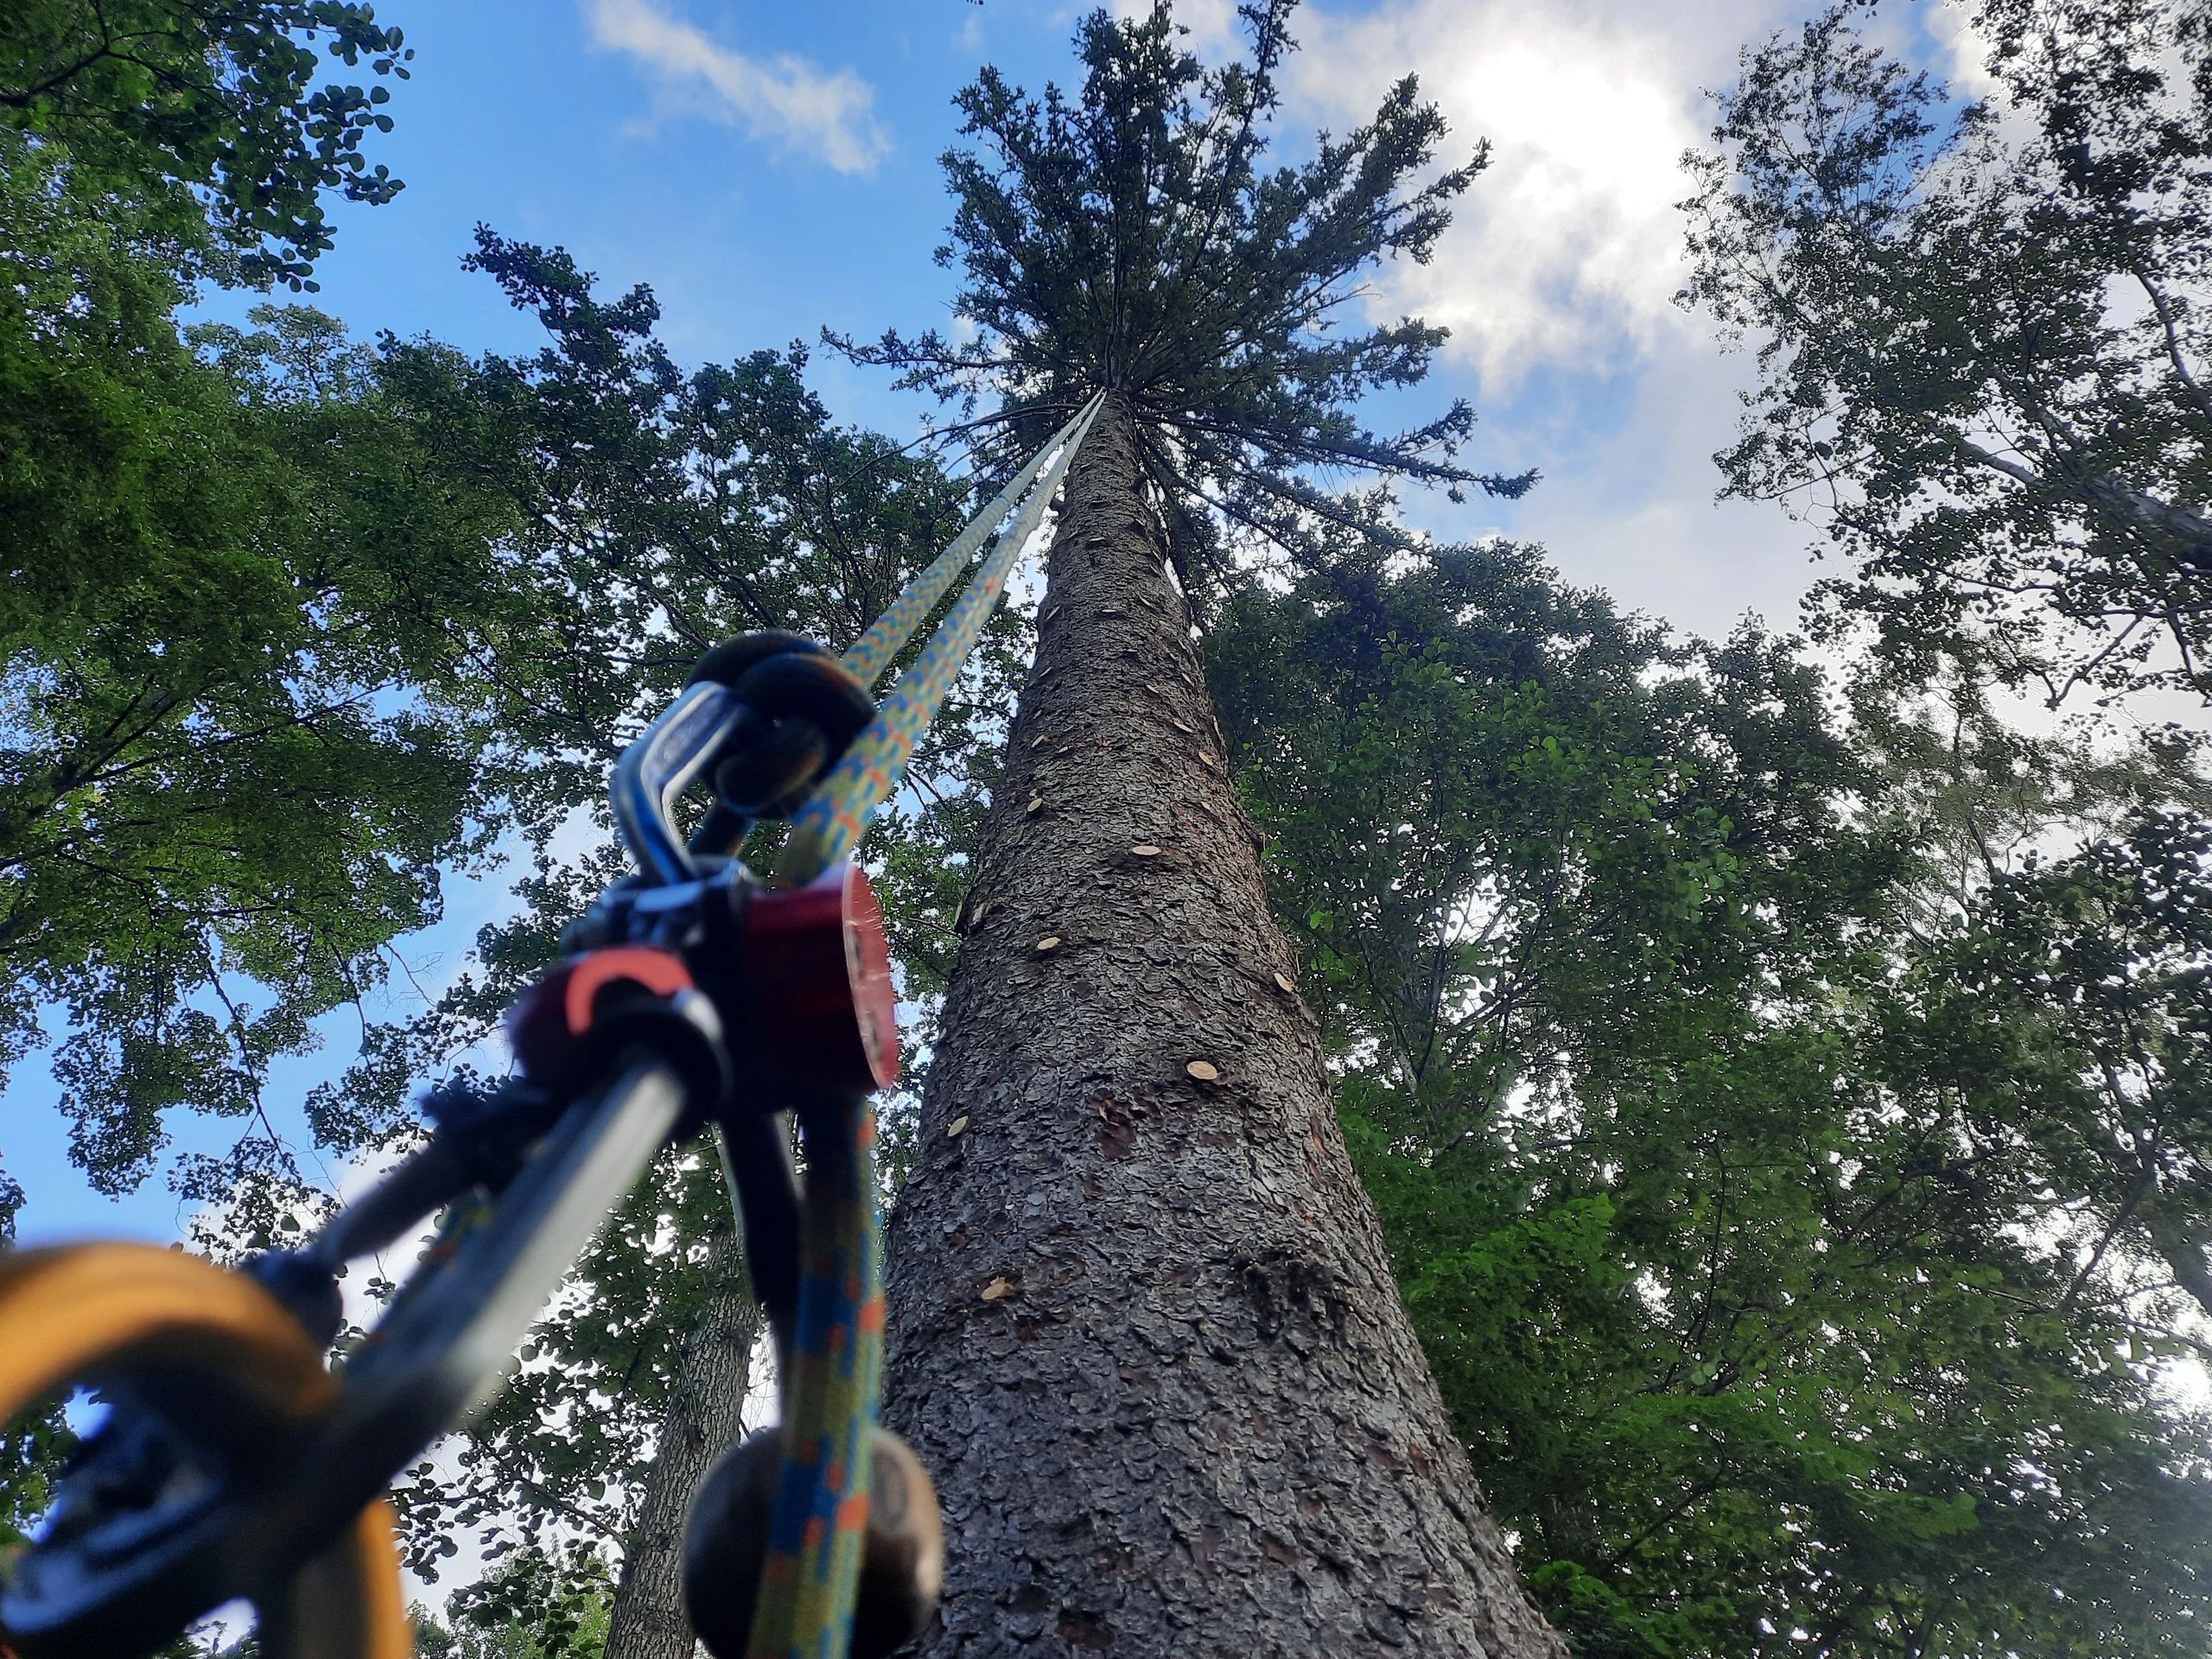 Image: Arborist's view up a tree stem into the canopy in Nesodden, Akershus, Viken county, Norway.